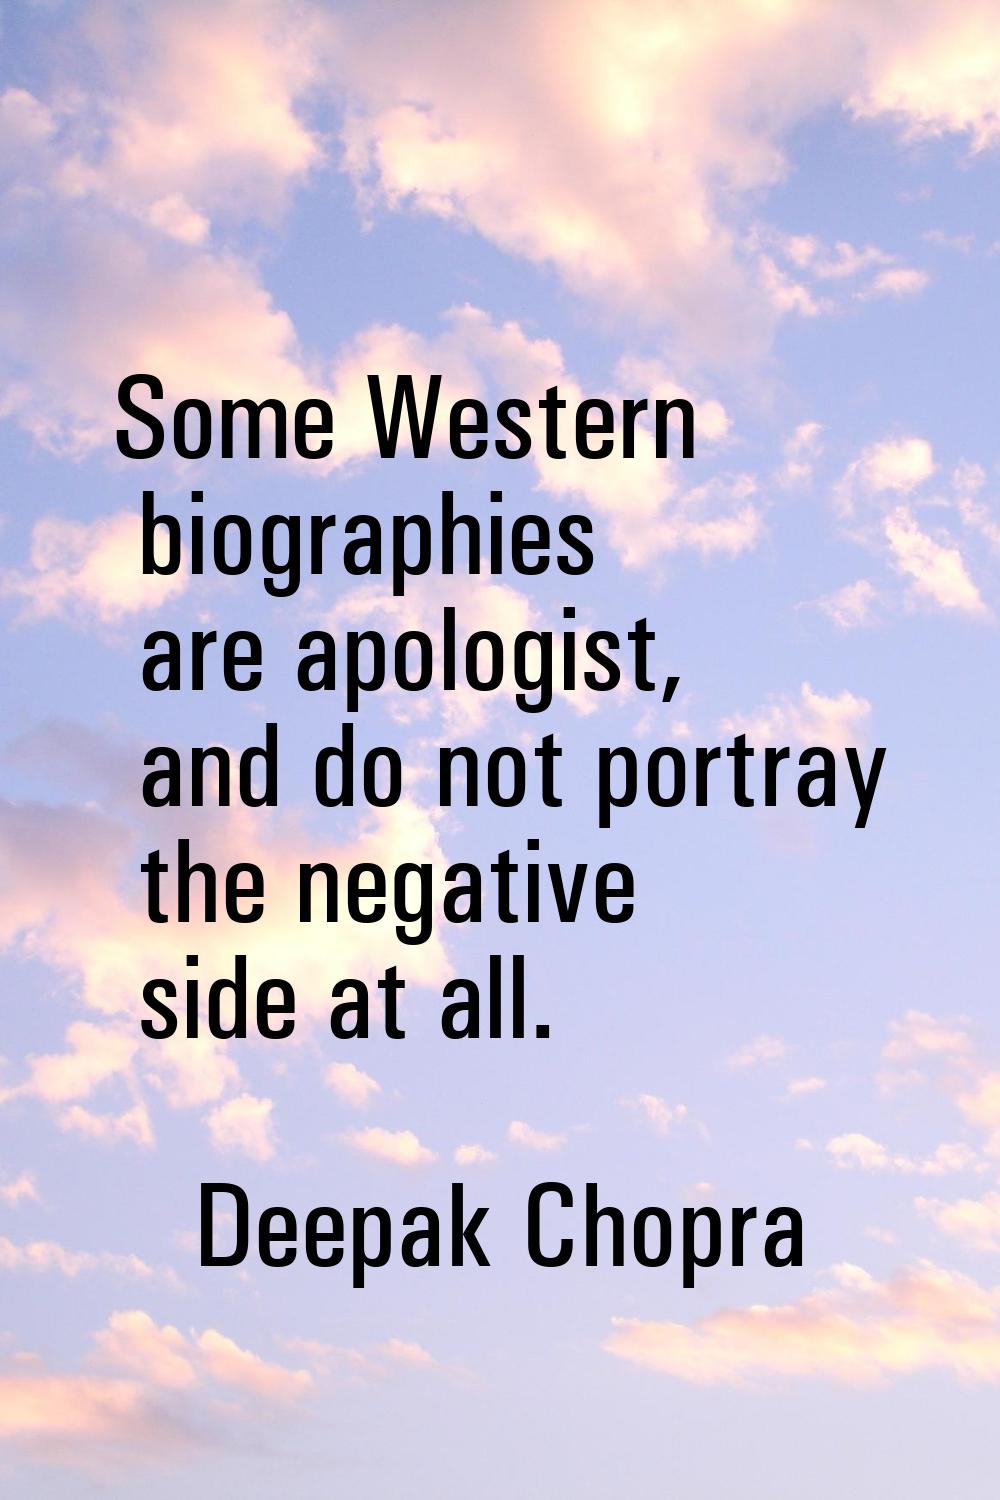 Some Western biographies are apologist, and do not portray the negative side at all.